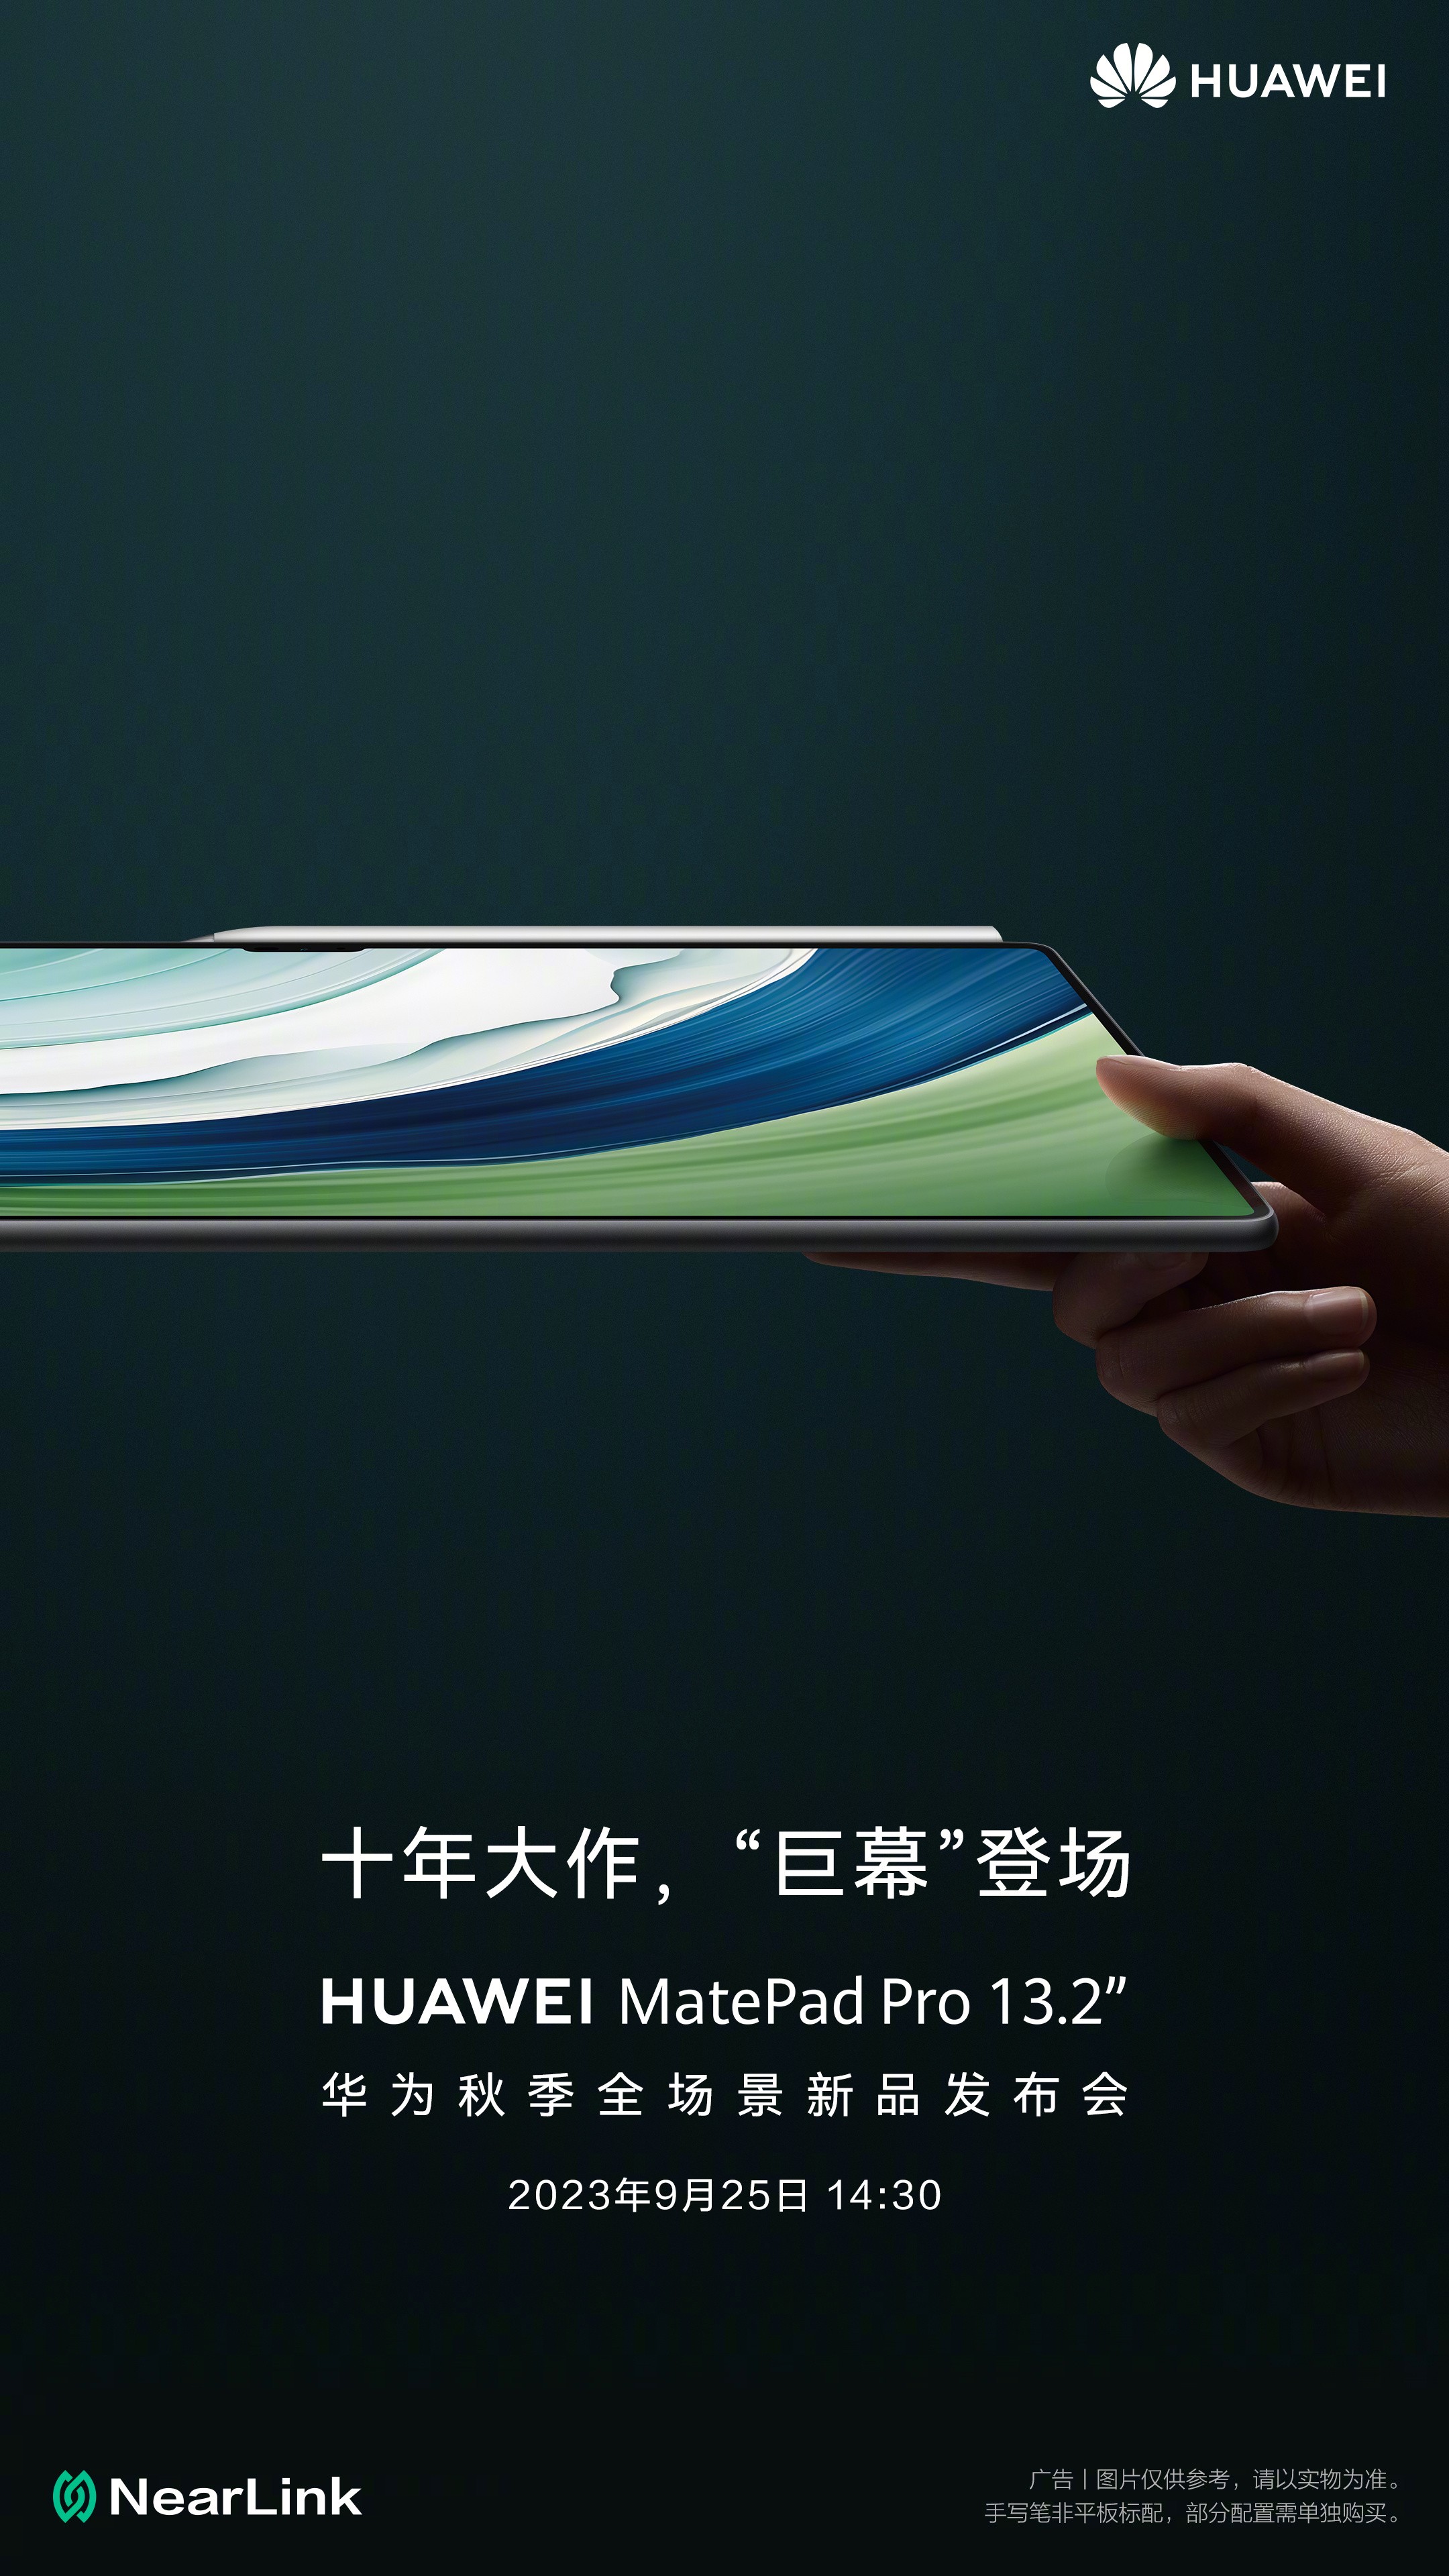 Huawei is launching MatePad Pro 13.2 on September 25